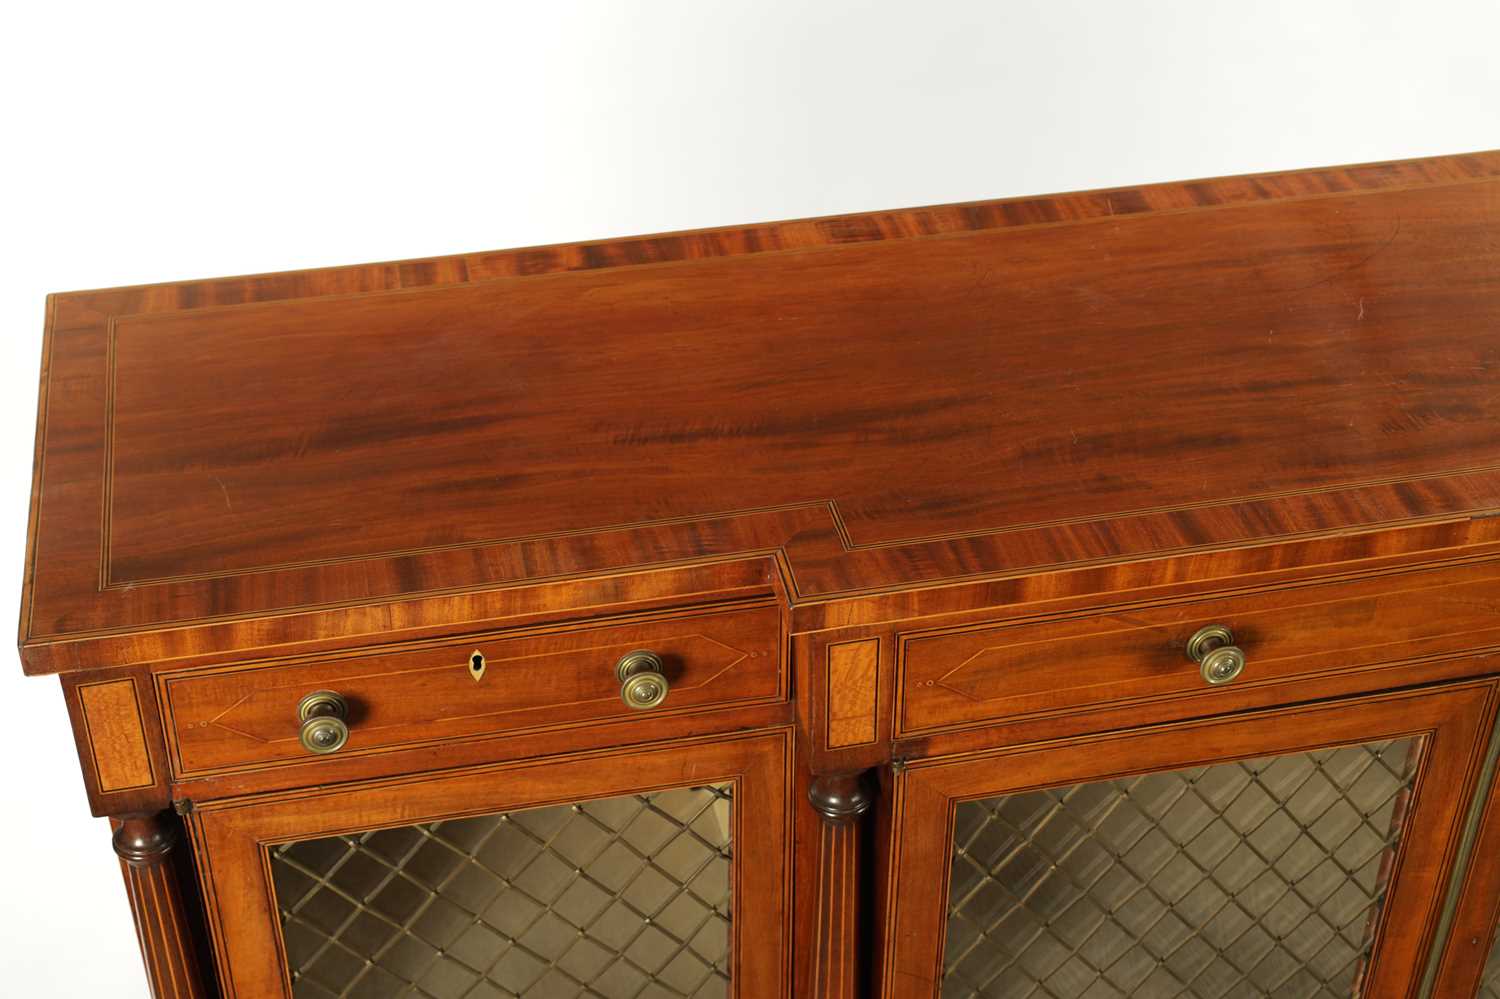 A FINE GEORGE III SATINWOOD BANDED AND INLAID FIGURED MAHOGANY BREAKFRONT SIDE CABINET - Image 6 of 6